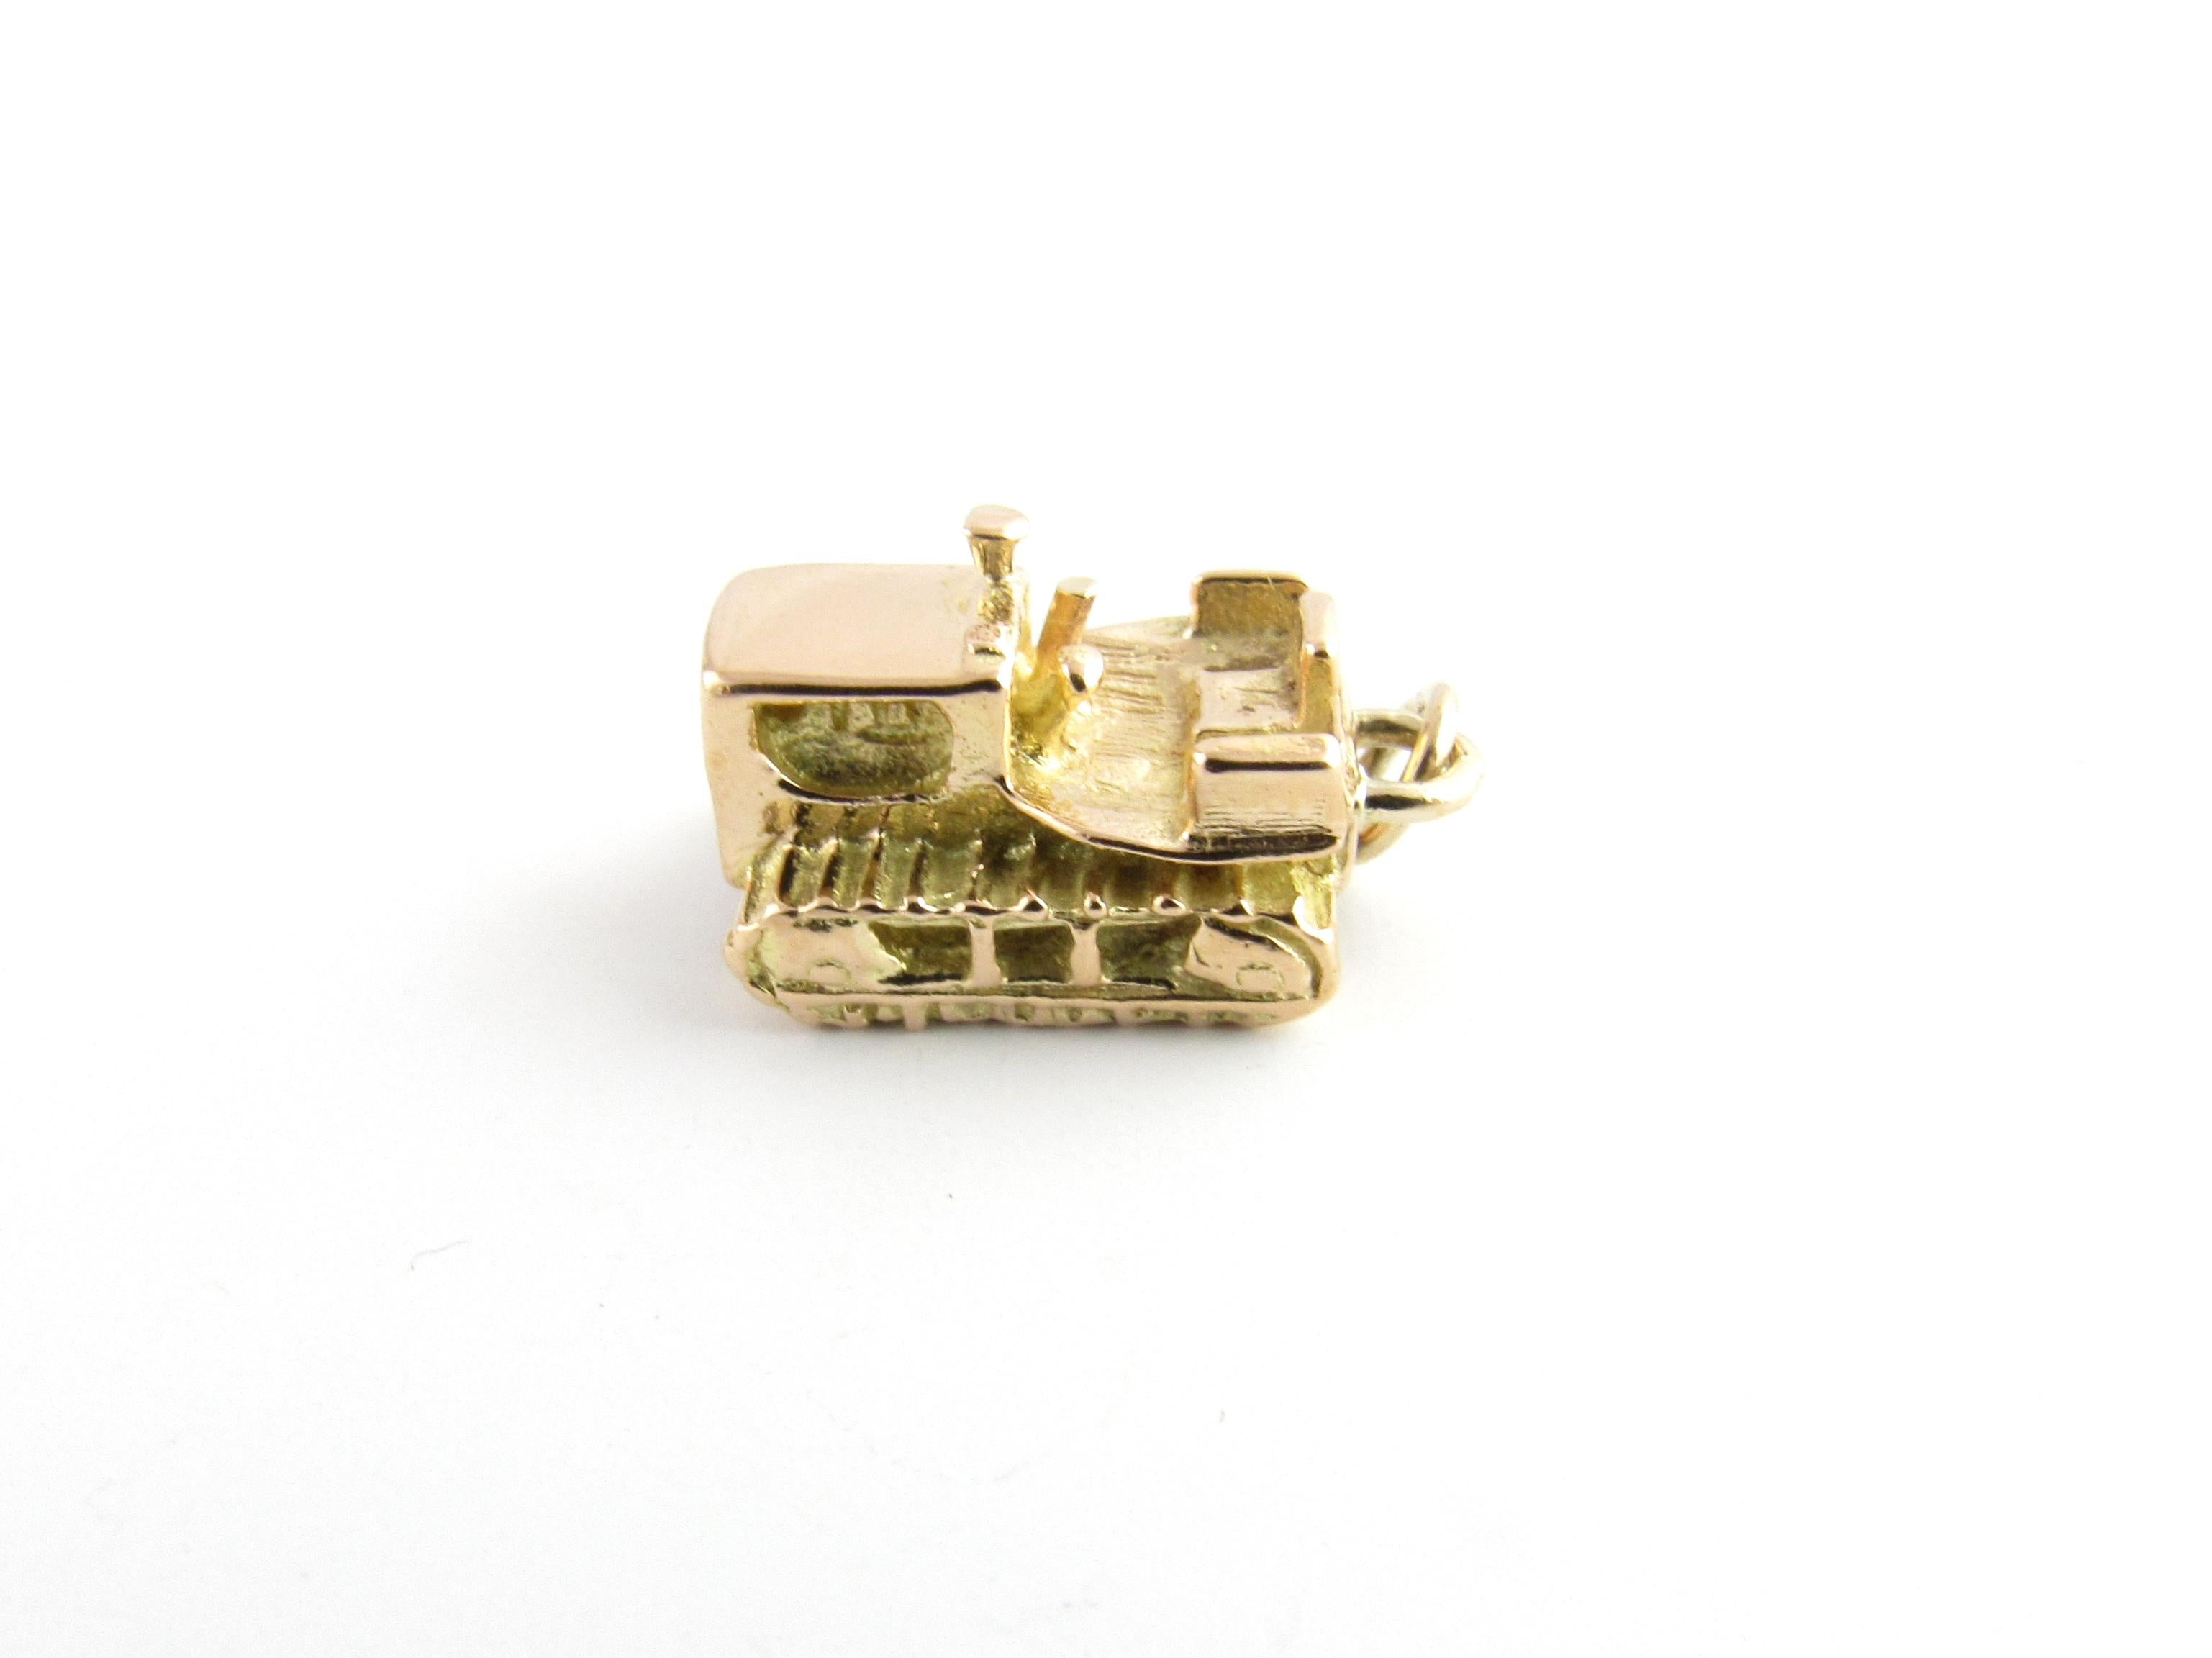 Vintage 14 Karat Yellow Gold Tractor Charm

Life is better on the farm!

This lovely 3D charm features a miniature tractor meticulously detailed in 14K yellow gold.

Size: 18 mm x 10 mm (actual charm)

Weight: 3.4 dwt. / 5.4 gr.

Acid tested for 14K